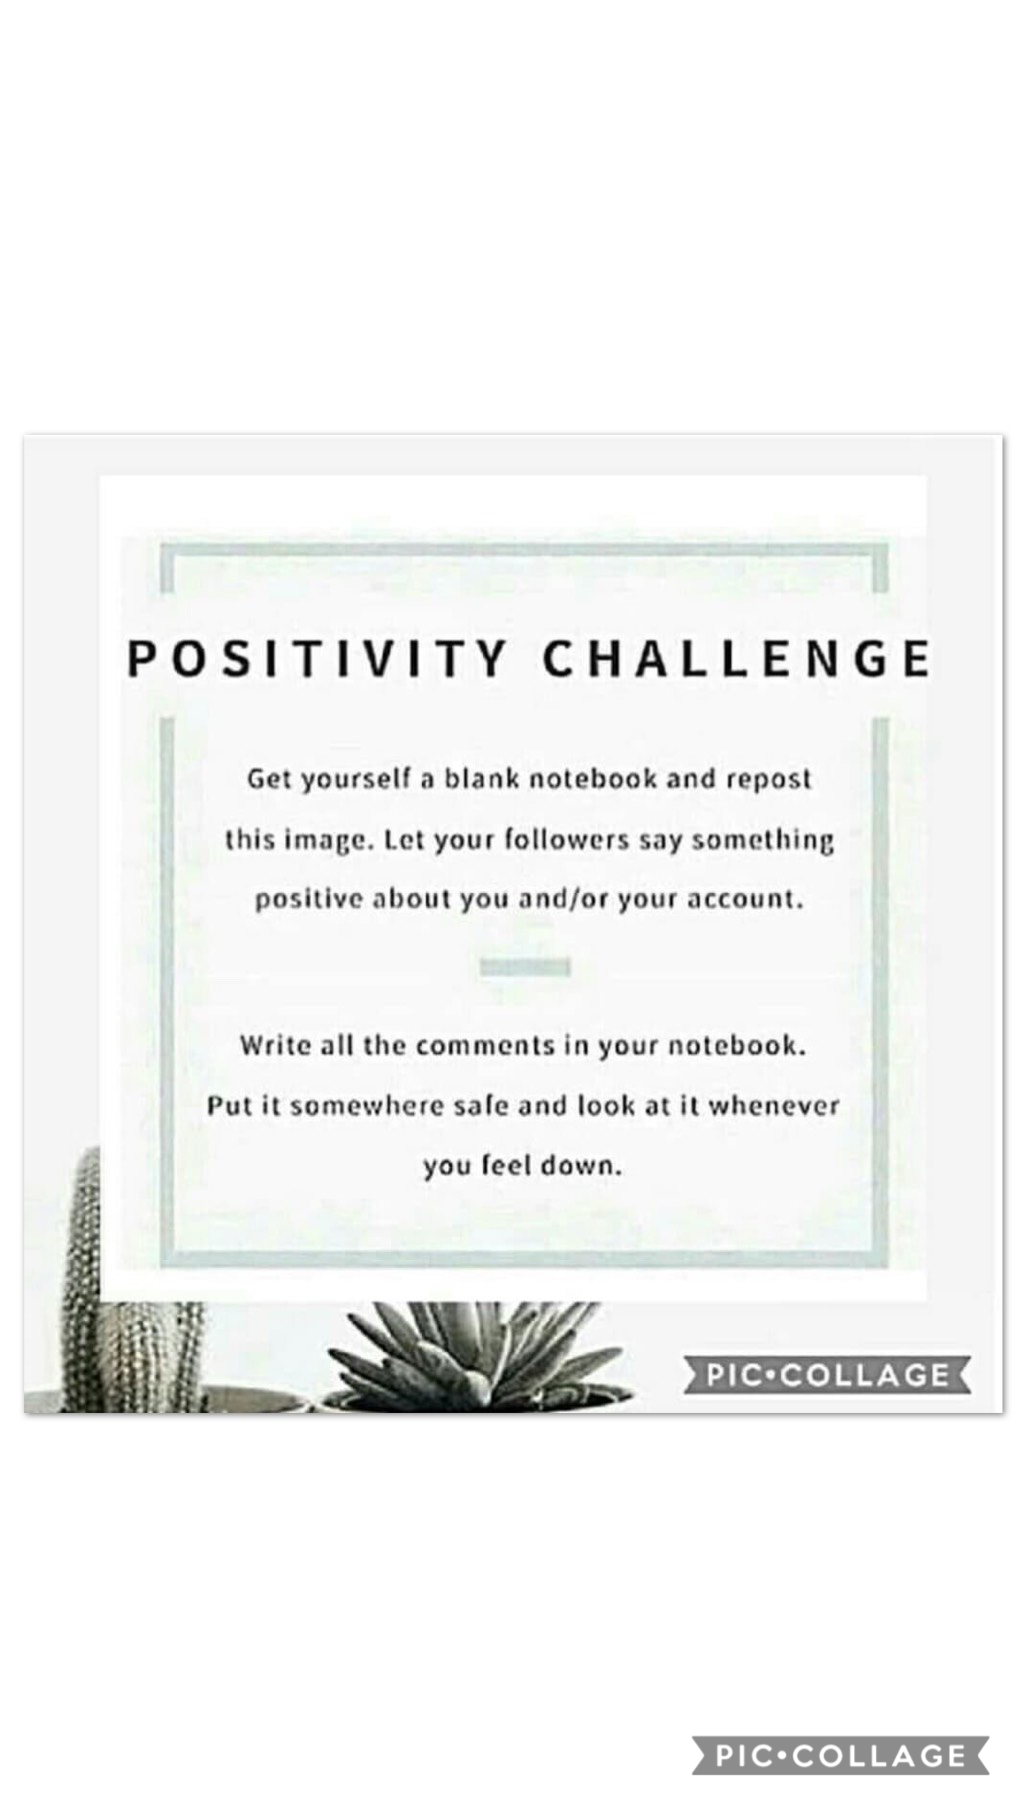 Tap>👍❤️

Can’t remember where I got this from, oh well!

Say something positive and like this collage! Ask me questions! Repost this on your account and see what people say!

1/15/19